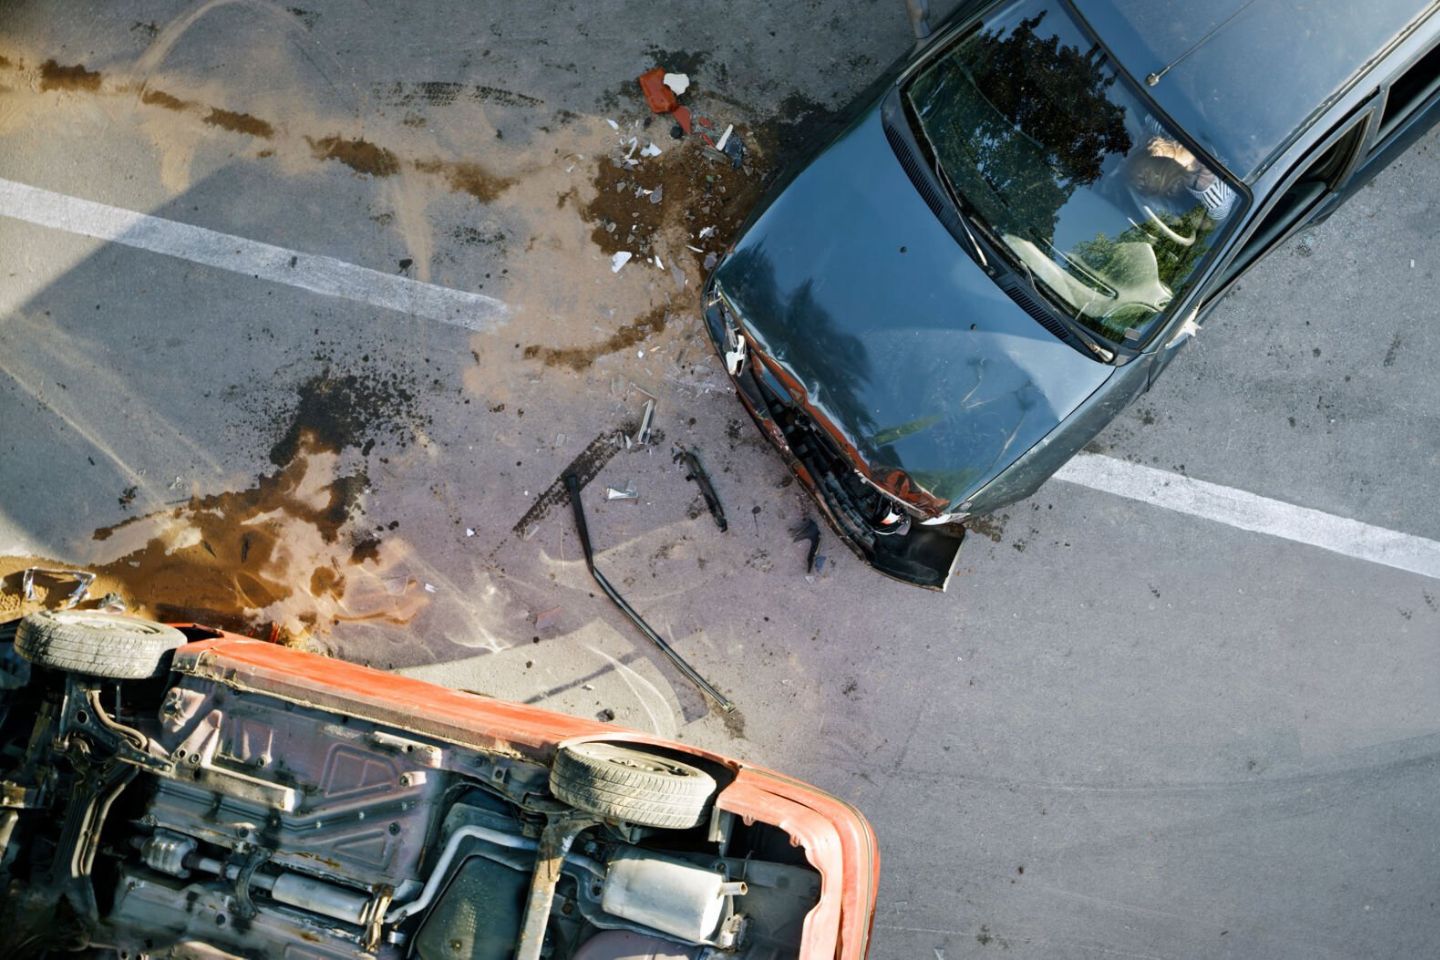 Reasons to Seek Legal Guidance After a PCH Crash